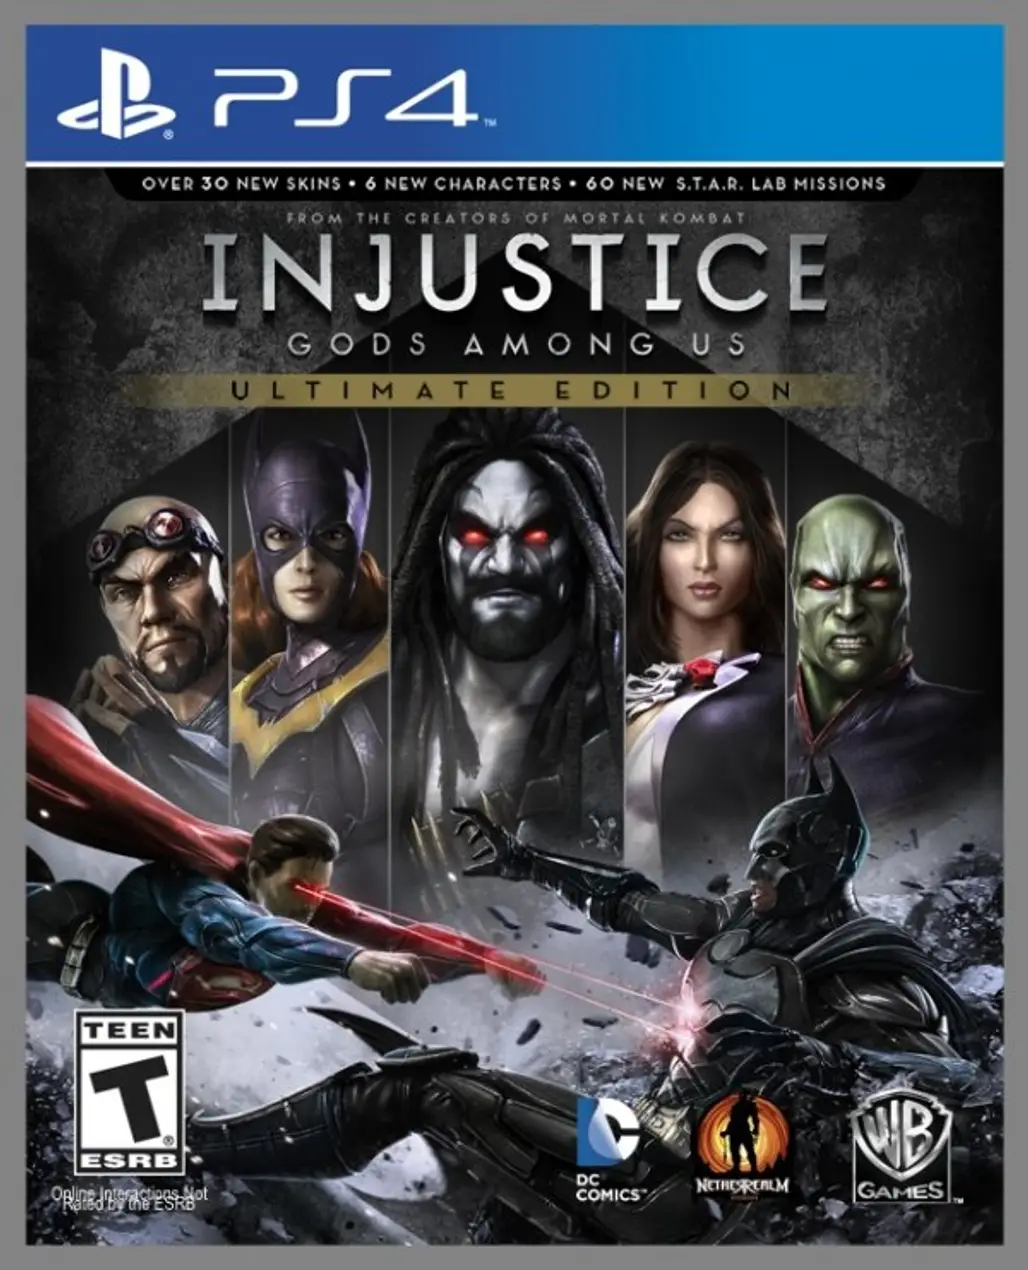 Injustice: Gods among Us Ultimate Edition